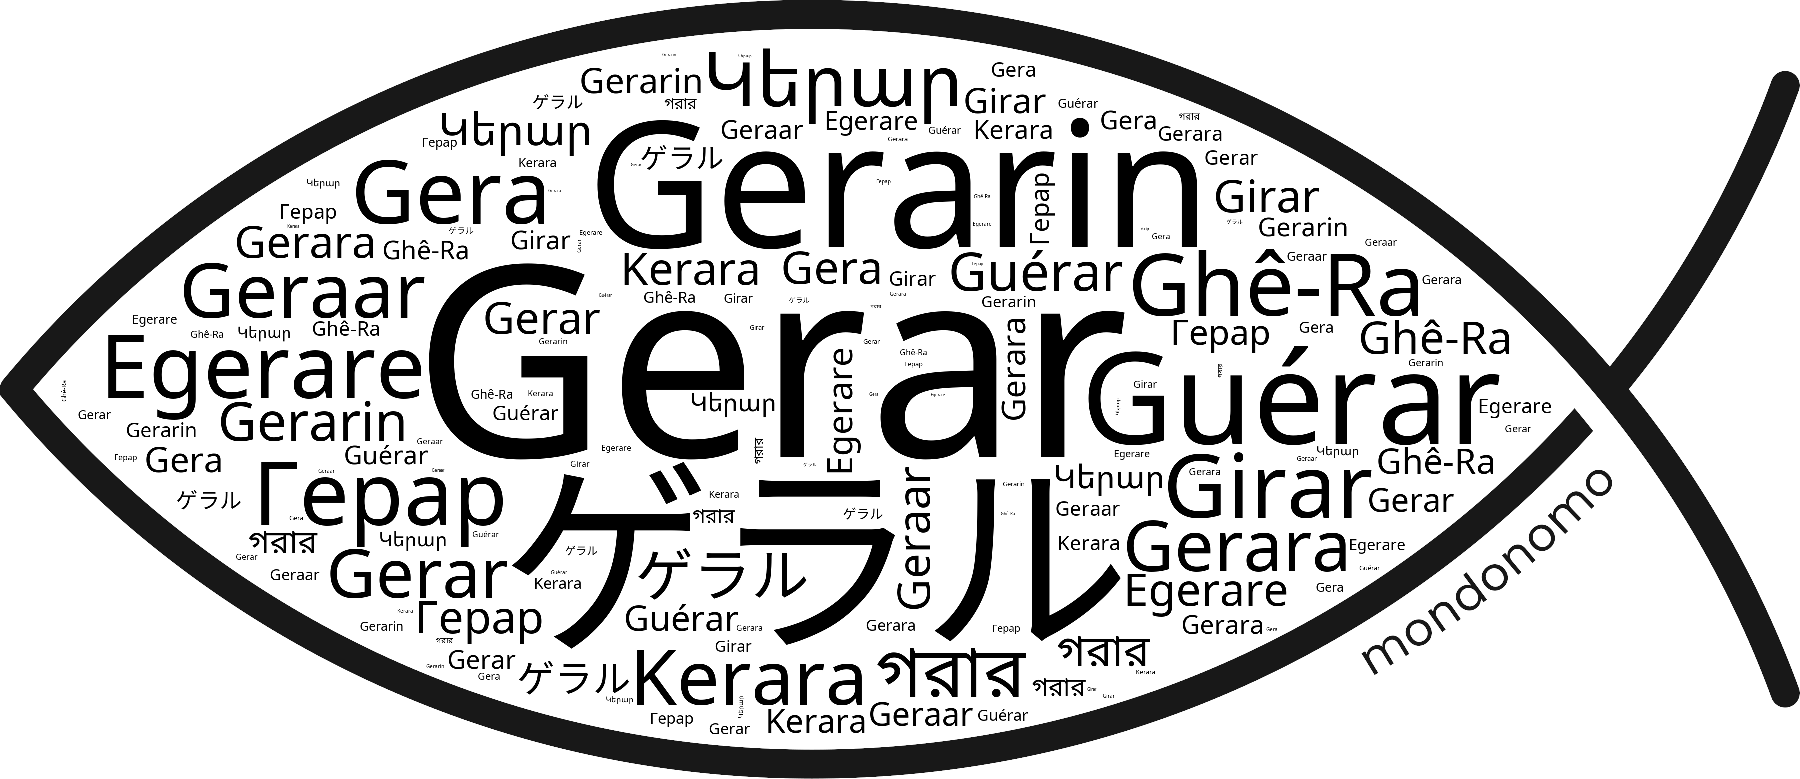 Name Gerar in the world's Bibles